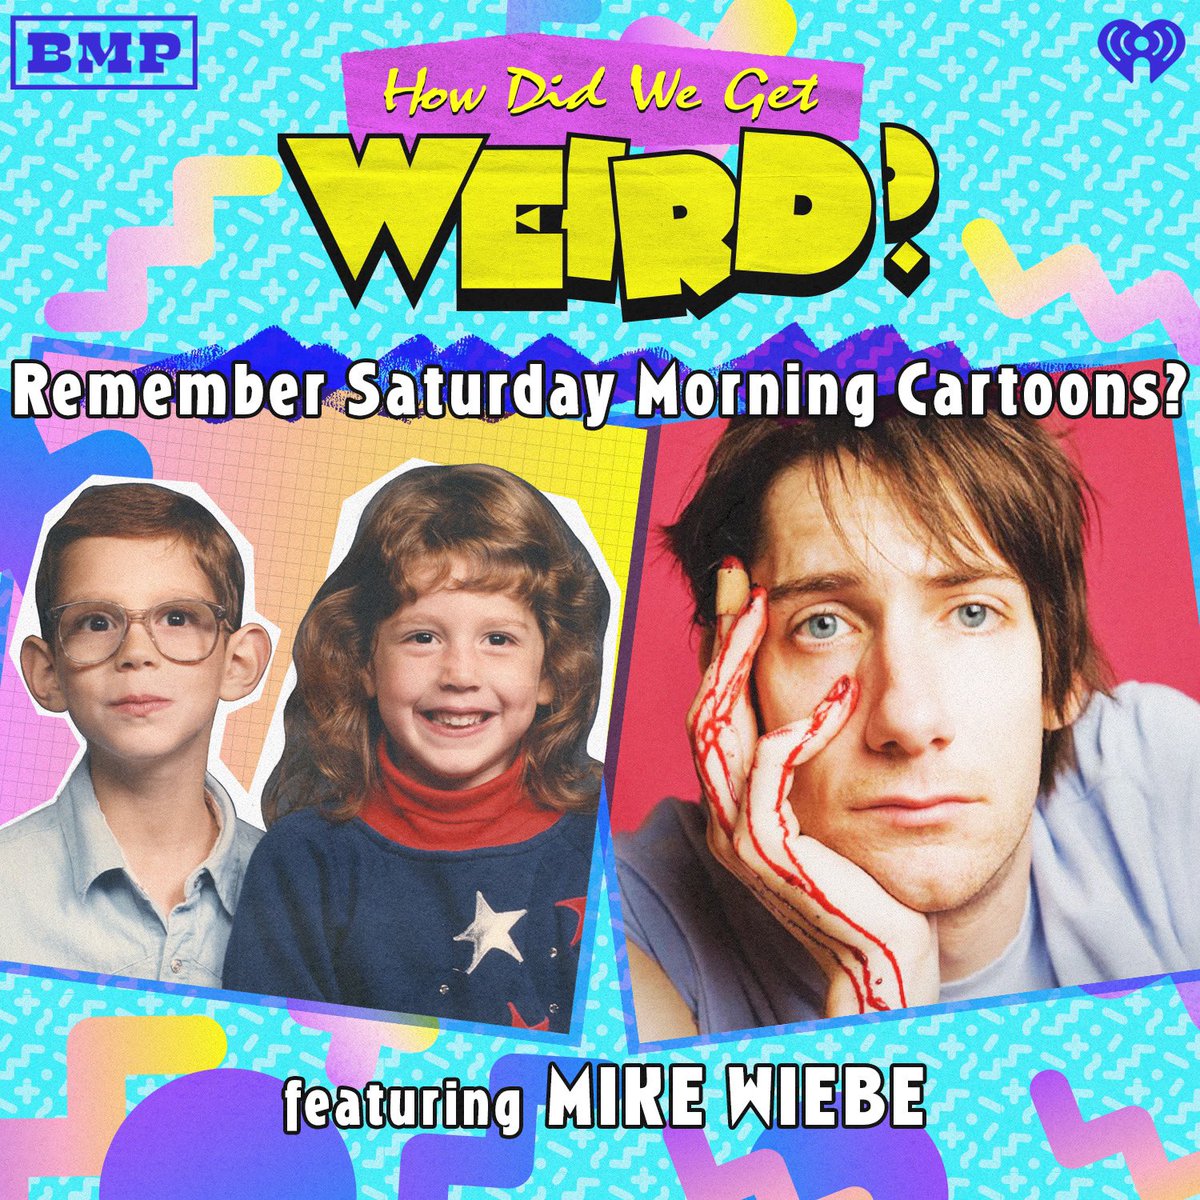 Today @jonahmbayer and I are thrilled to welcome our friend @mikewiebe to #HDWGW! You might know Mike is in @thegamblers but did you know he grew up loving Saturday Morning Cartoons? Plus we talk about the forgotten celeb cartoons, the holes in those say-no-to-drugs ads and more!